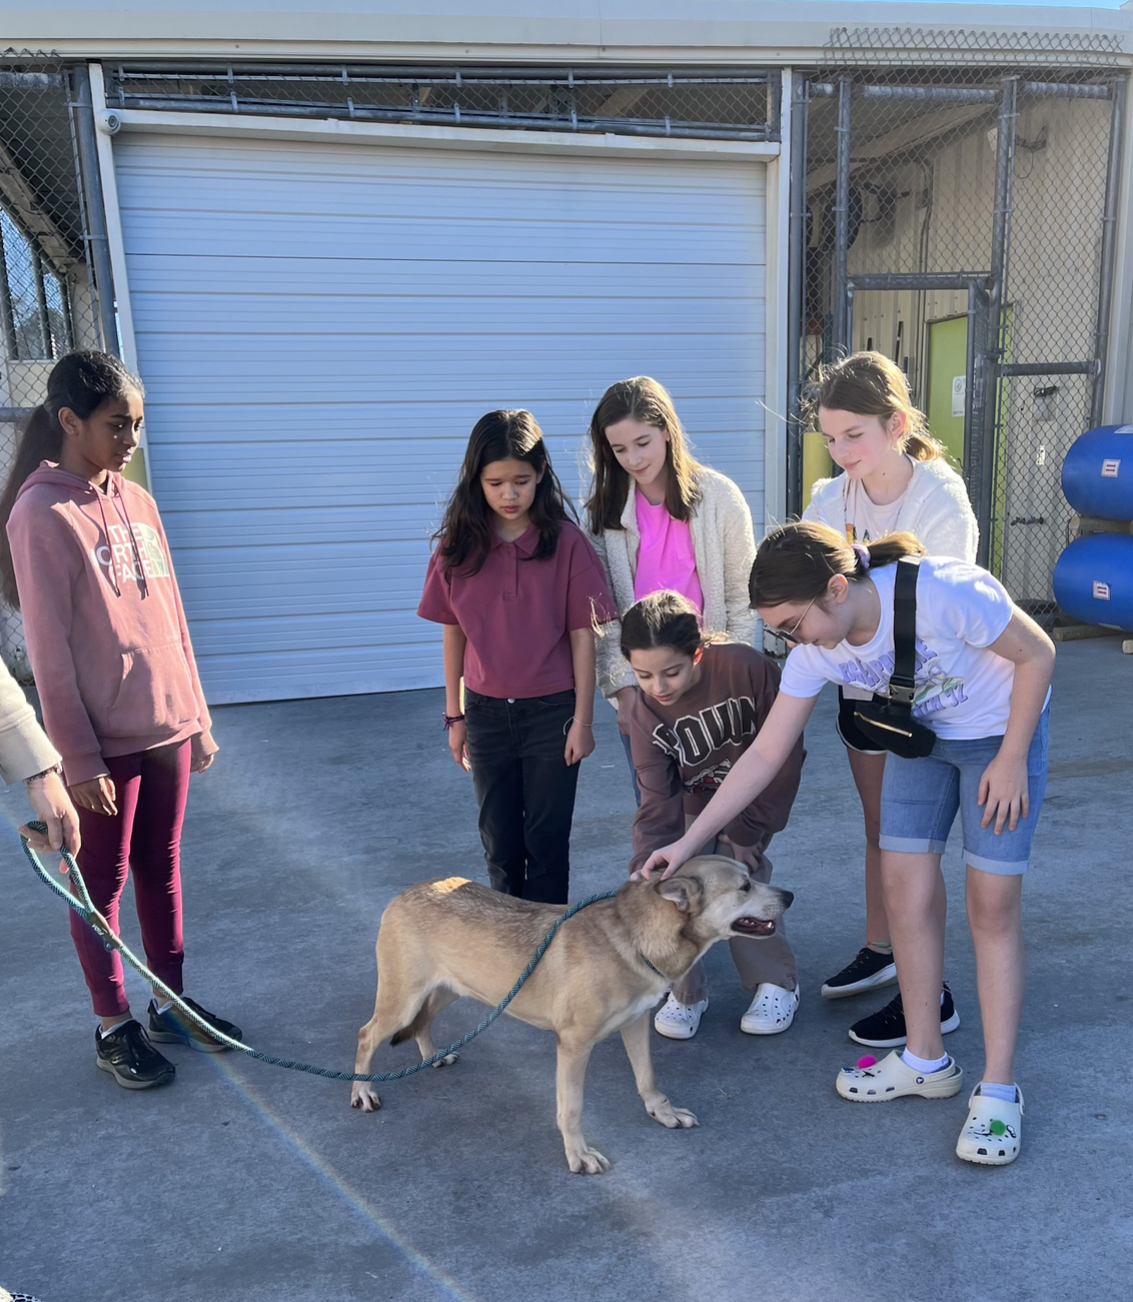 Members of the Mitchell Intermediate Destination Imagination team pet a dog as they performed community service at an animal shelter.